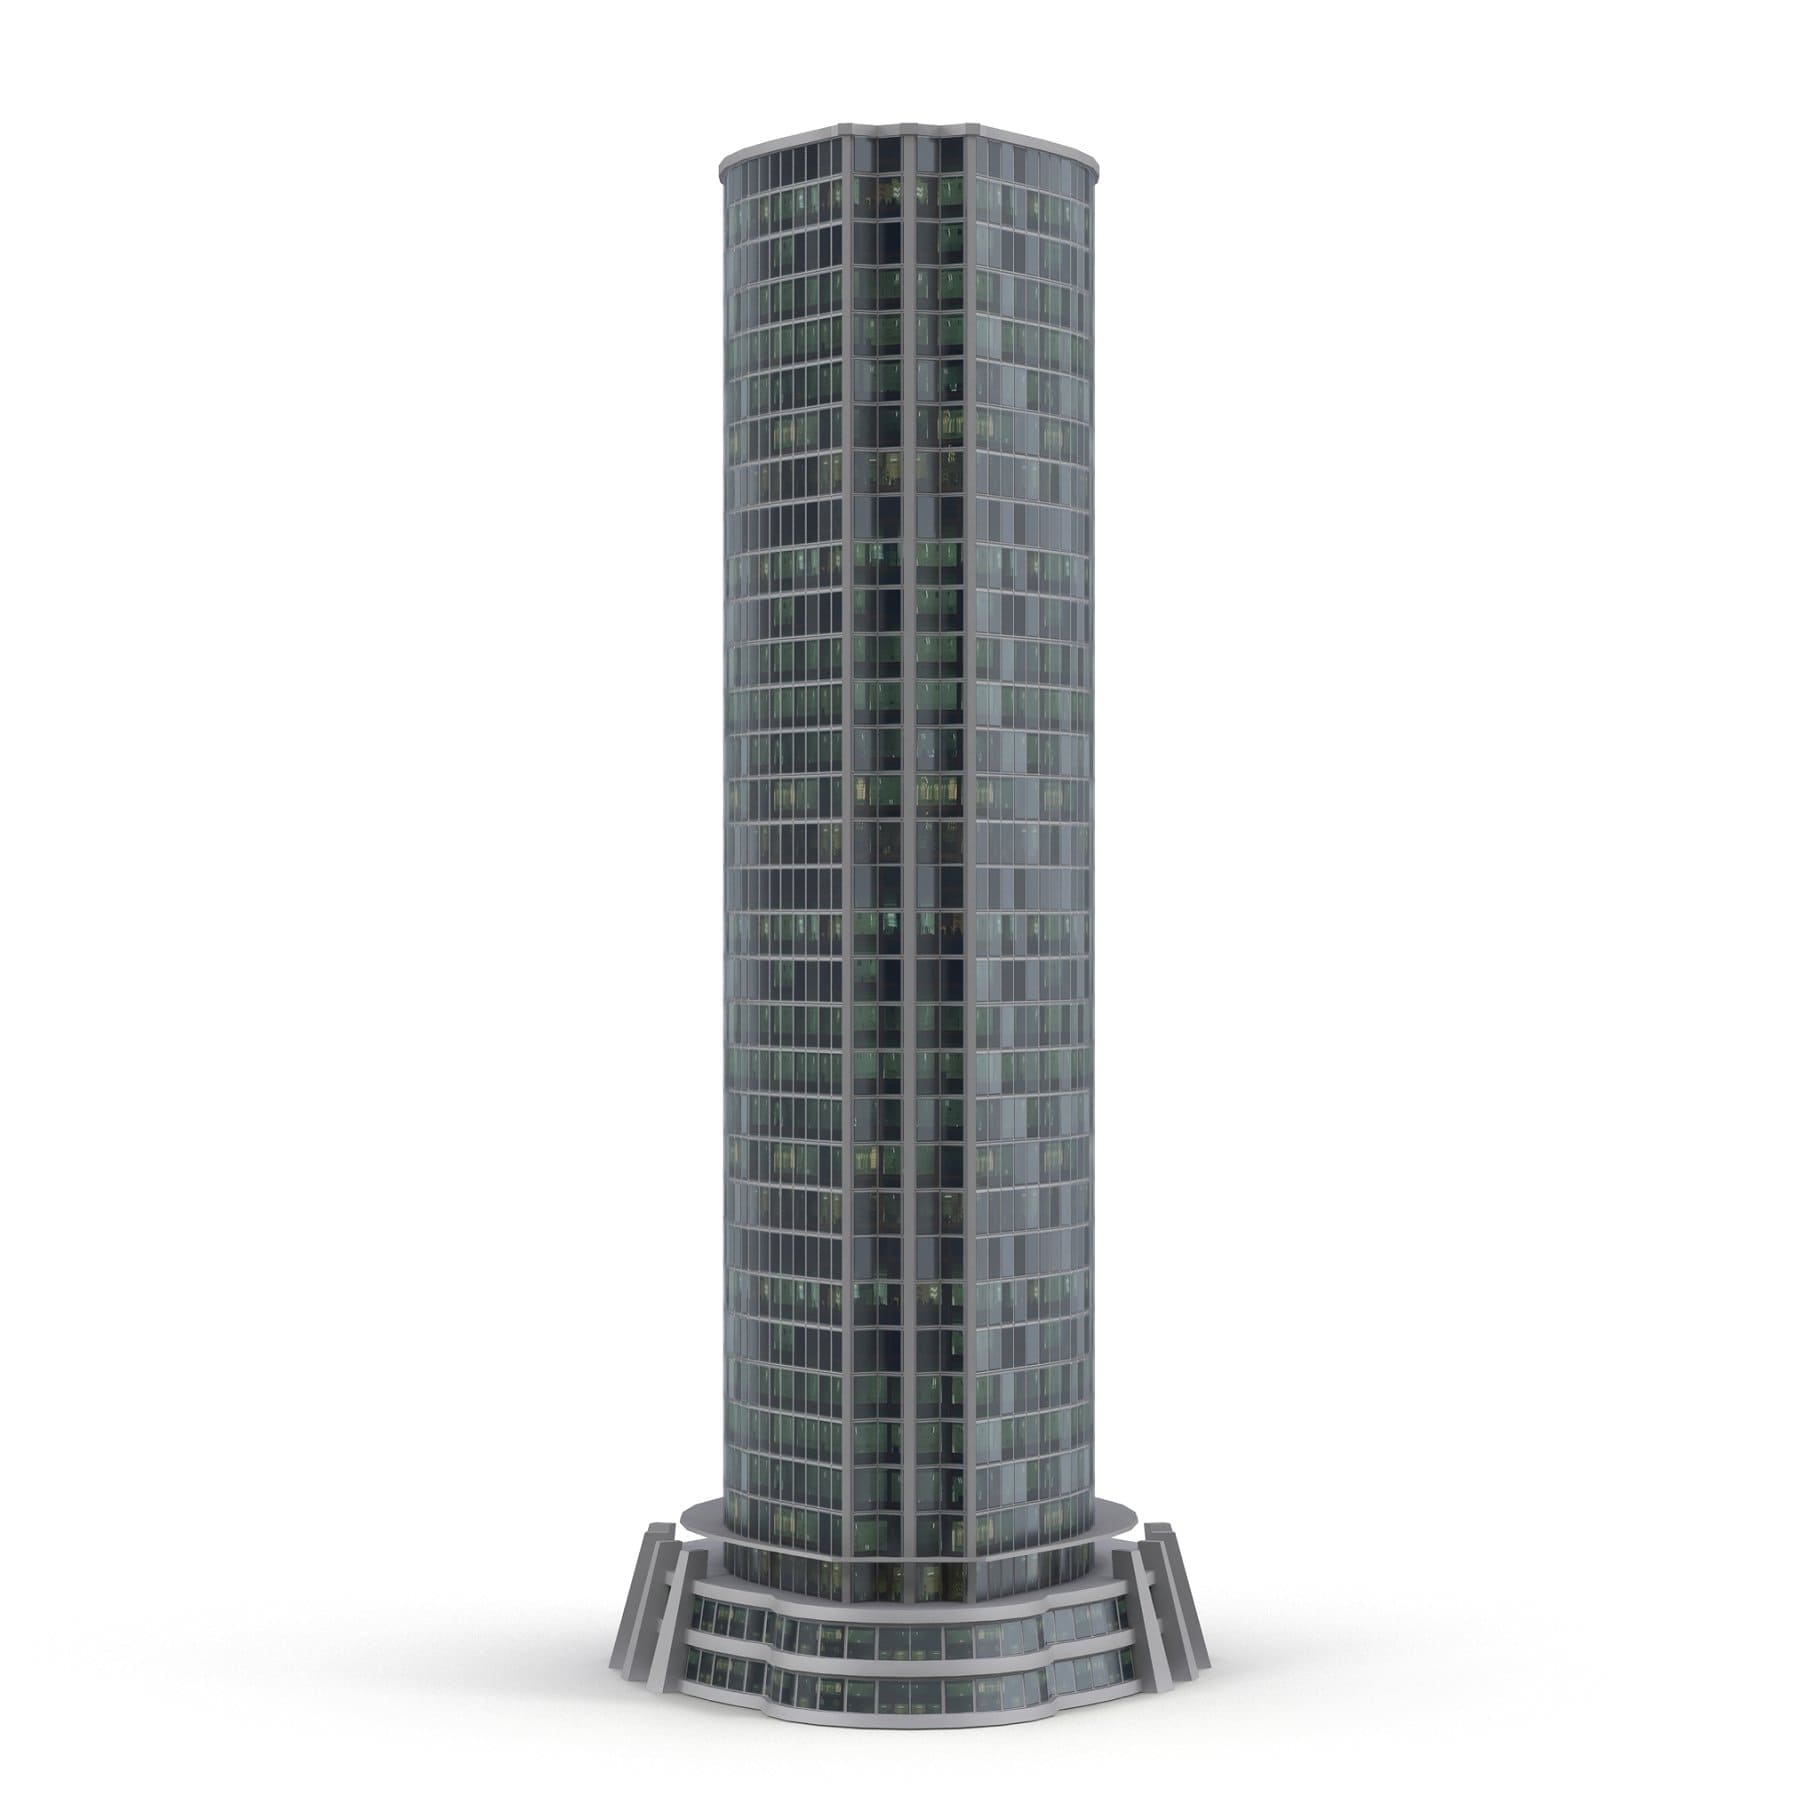 The sample of the skyscraper is shown from the narrow side.